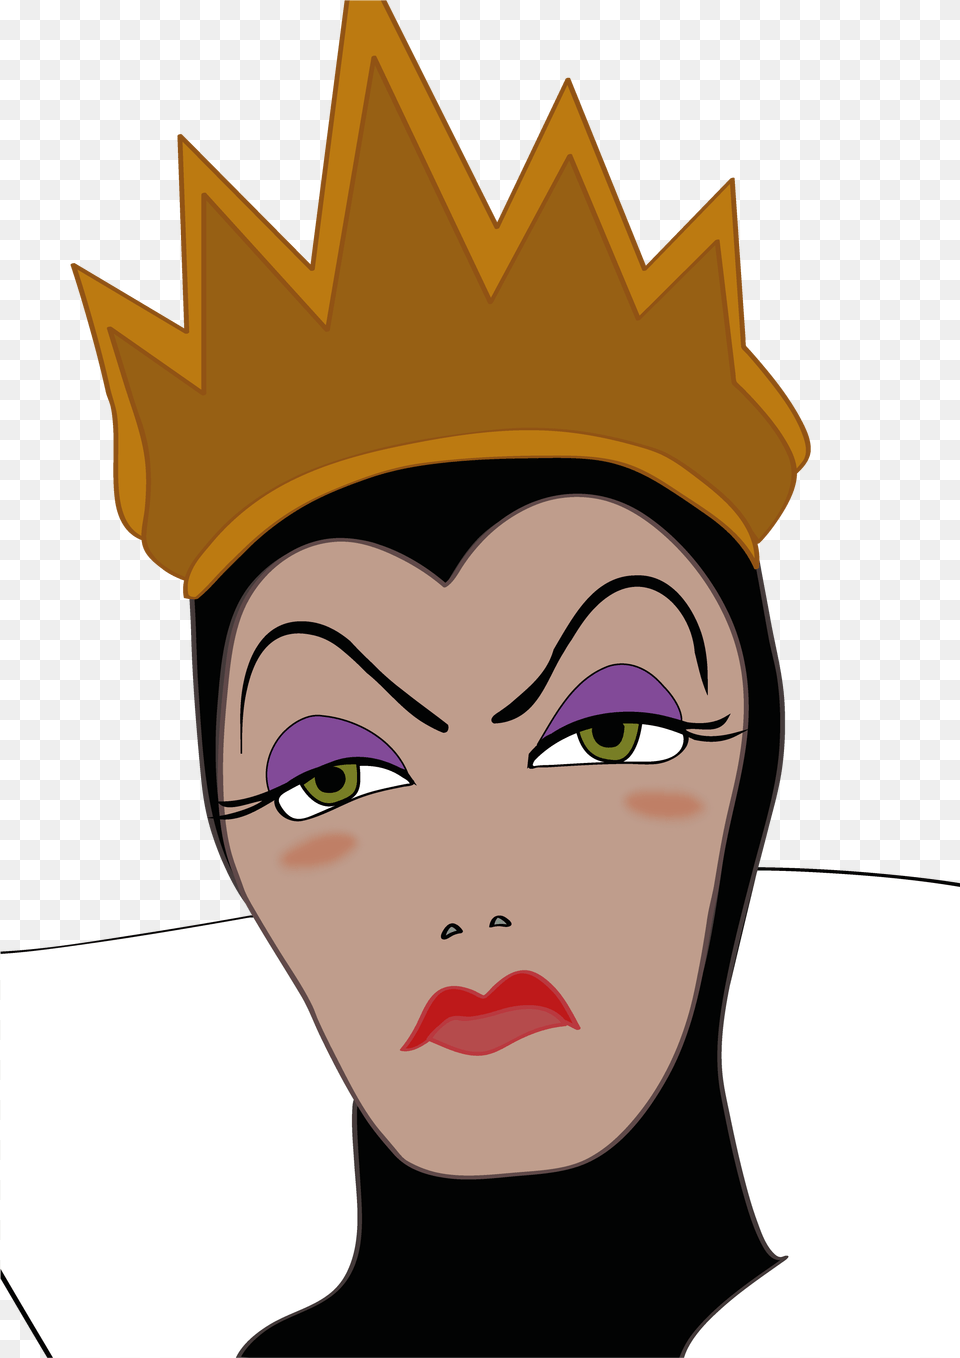 Evil Queen Maleficent Stepmother Queen Of Hearts Cartoon, Accessories, Jewelry, Crown, Adult Png Image